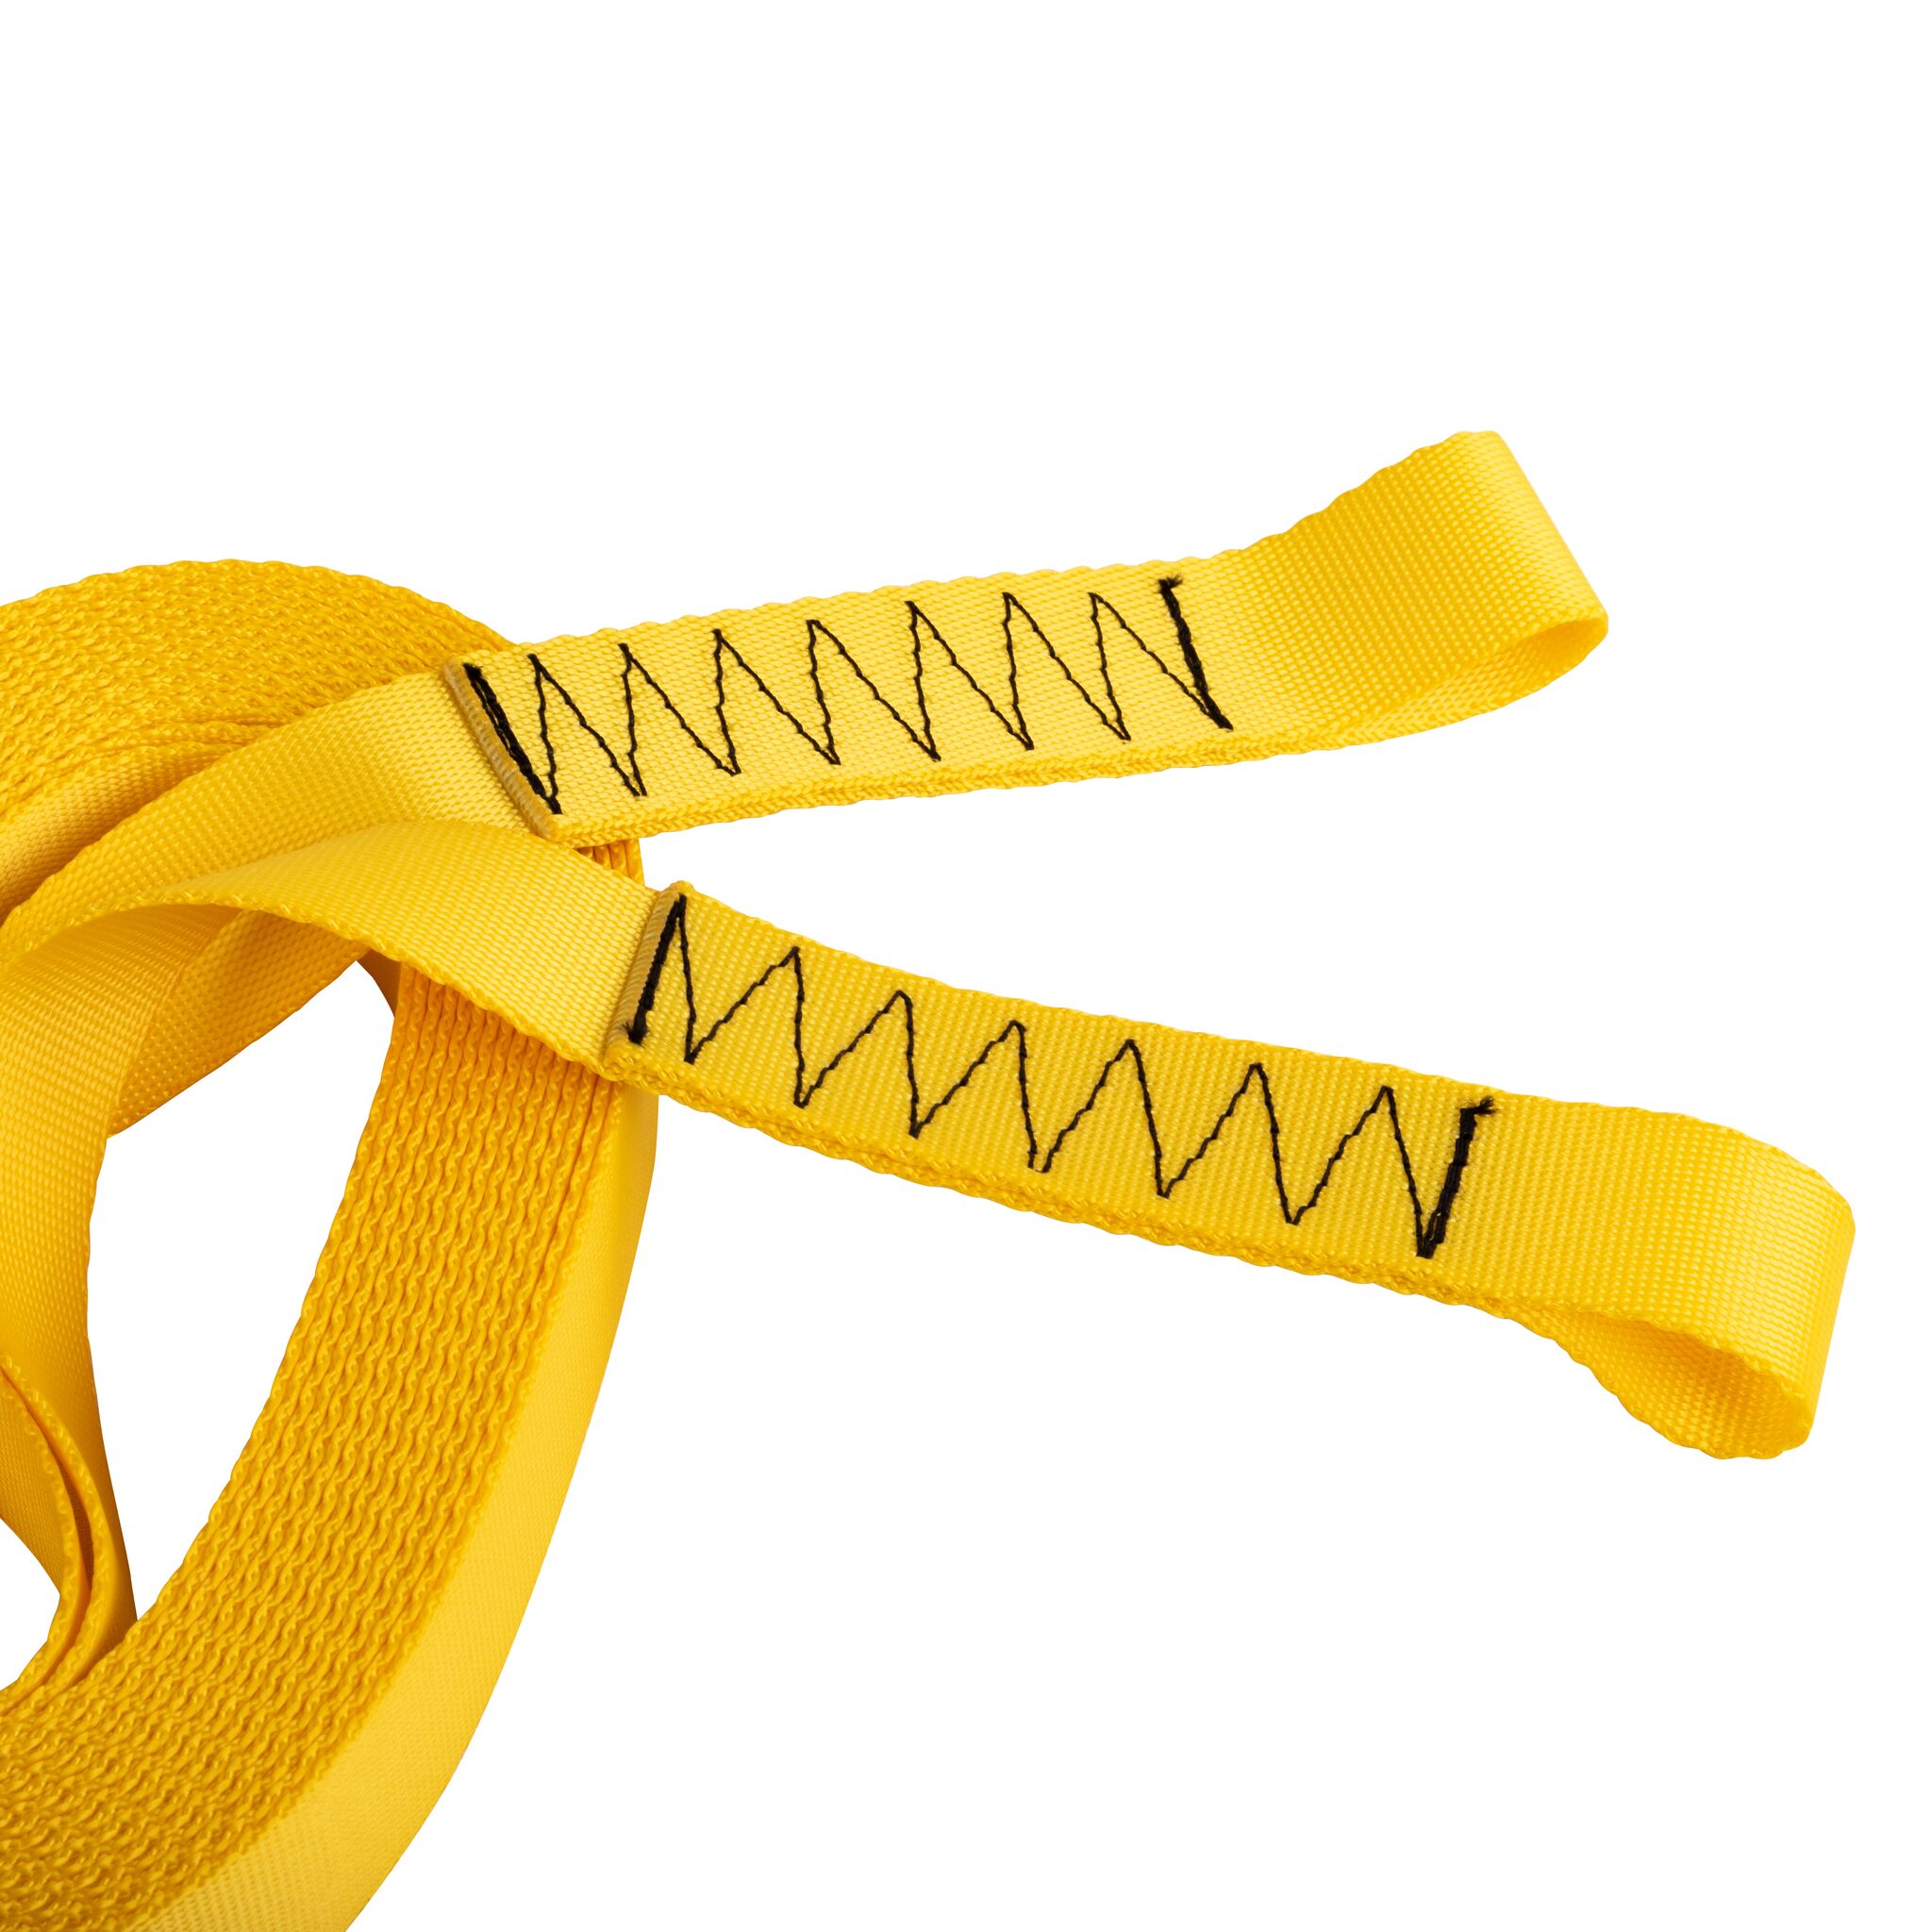 Buy online PLASTIMO Stretch rope - safety tape for lifelines